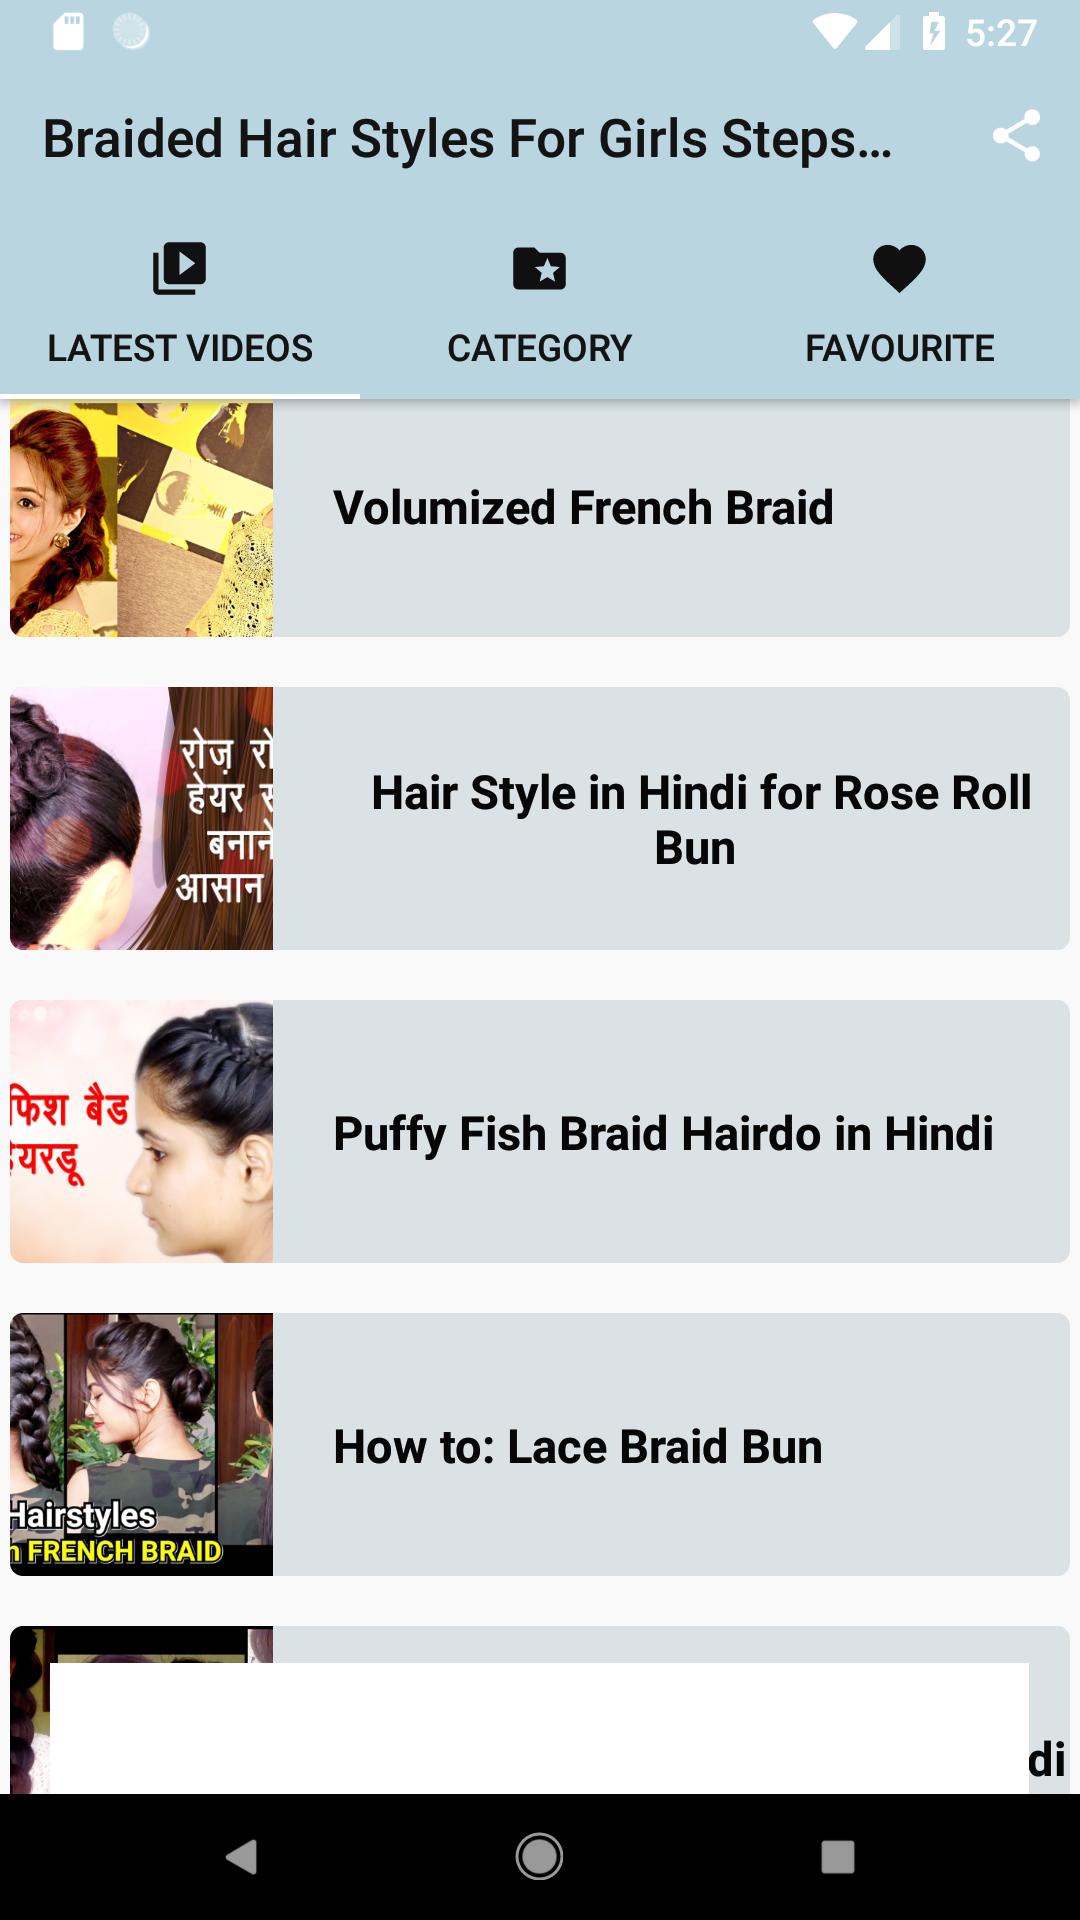 braided hair styles for girls steps by step video for